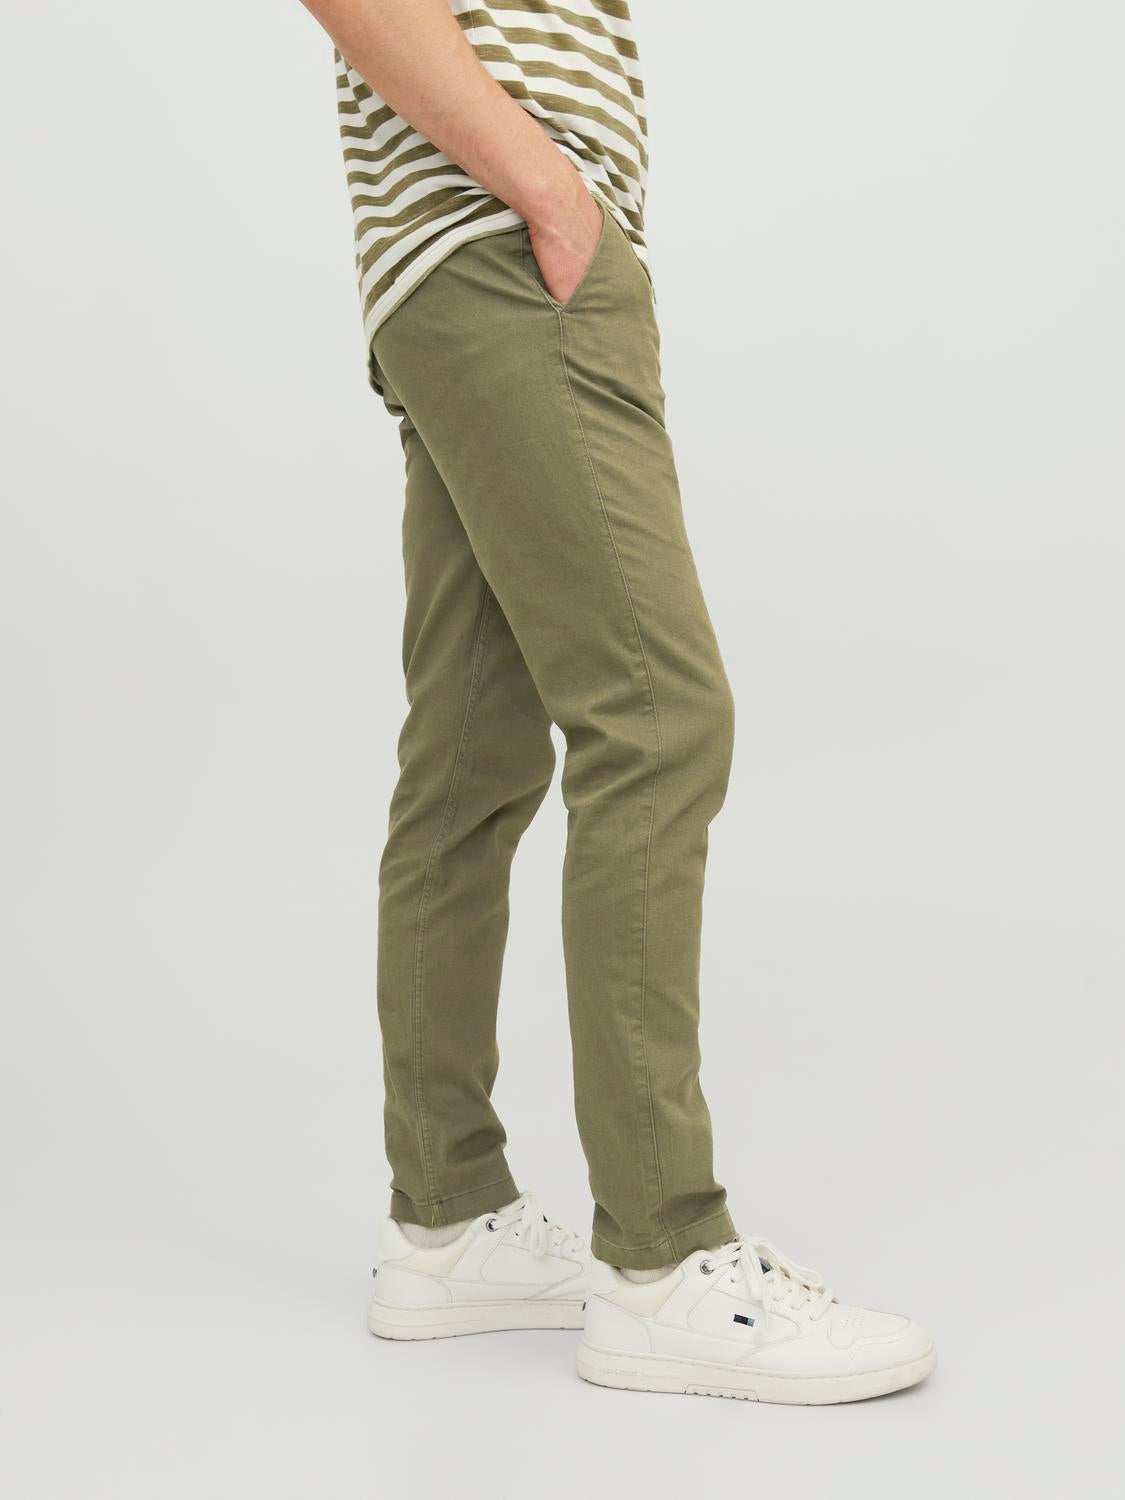 JACK & JONES Tapered Cargo Pants 'Paul Flake' in Night Blue | ABOUT YOU